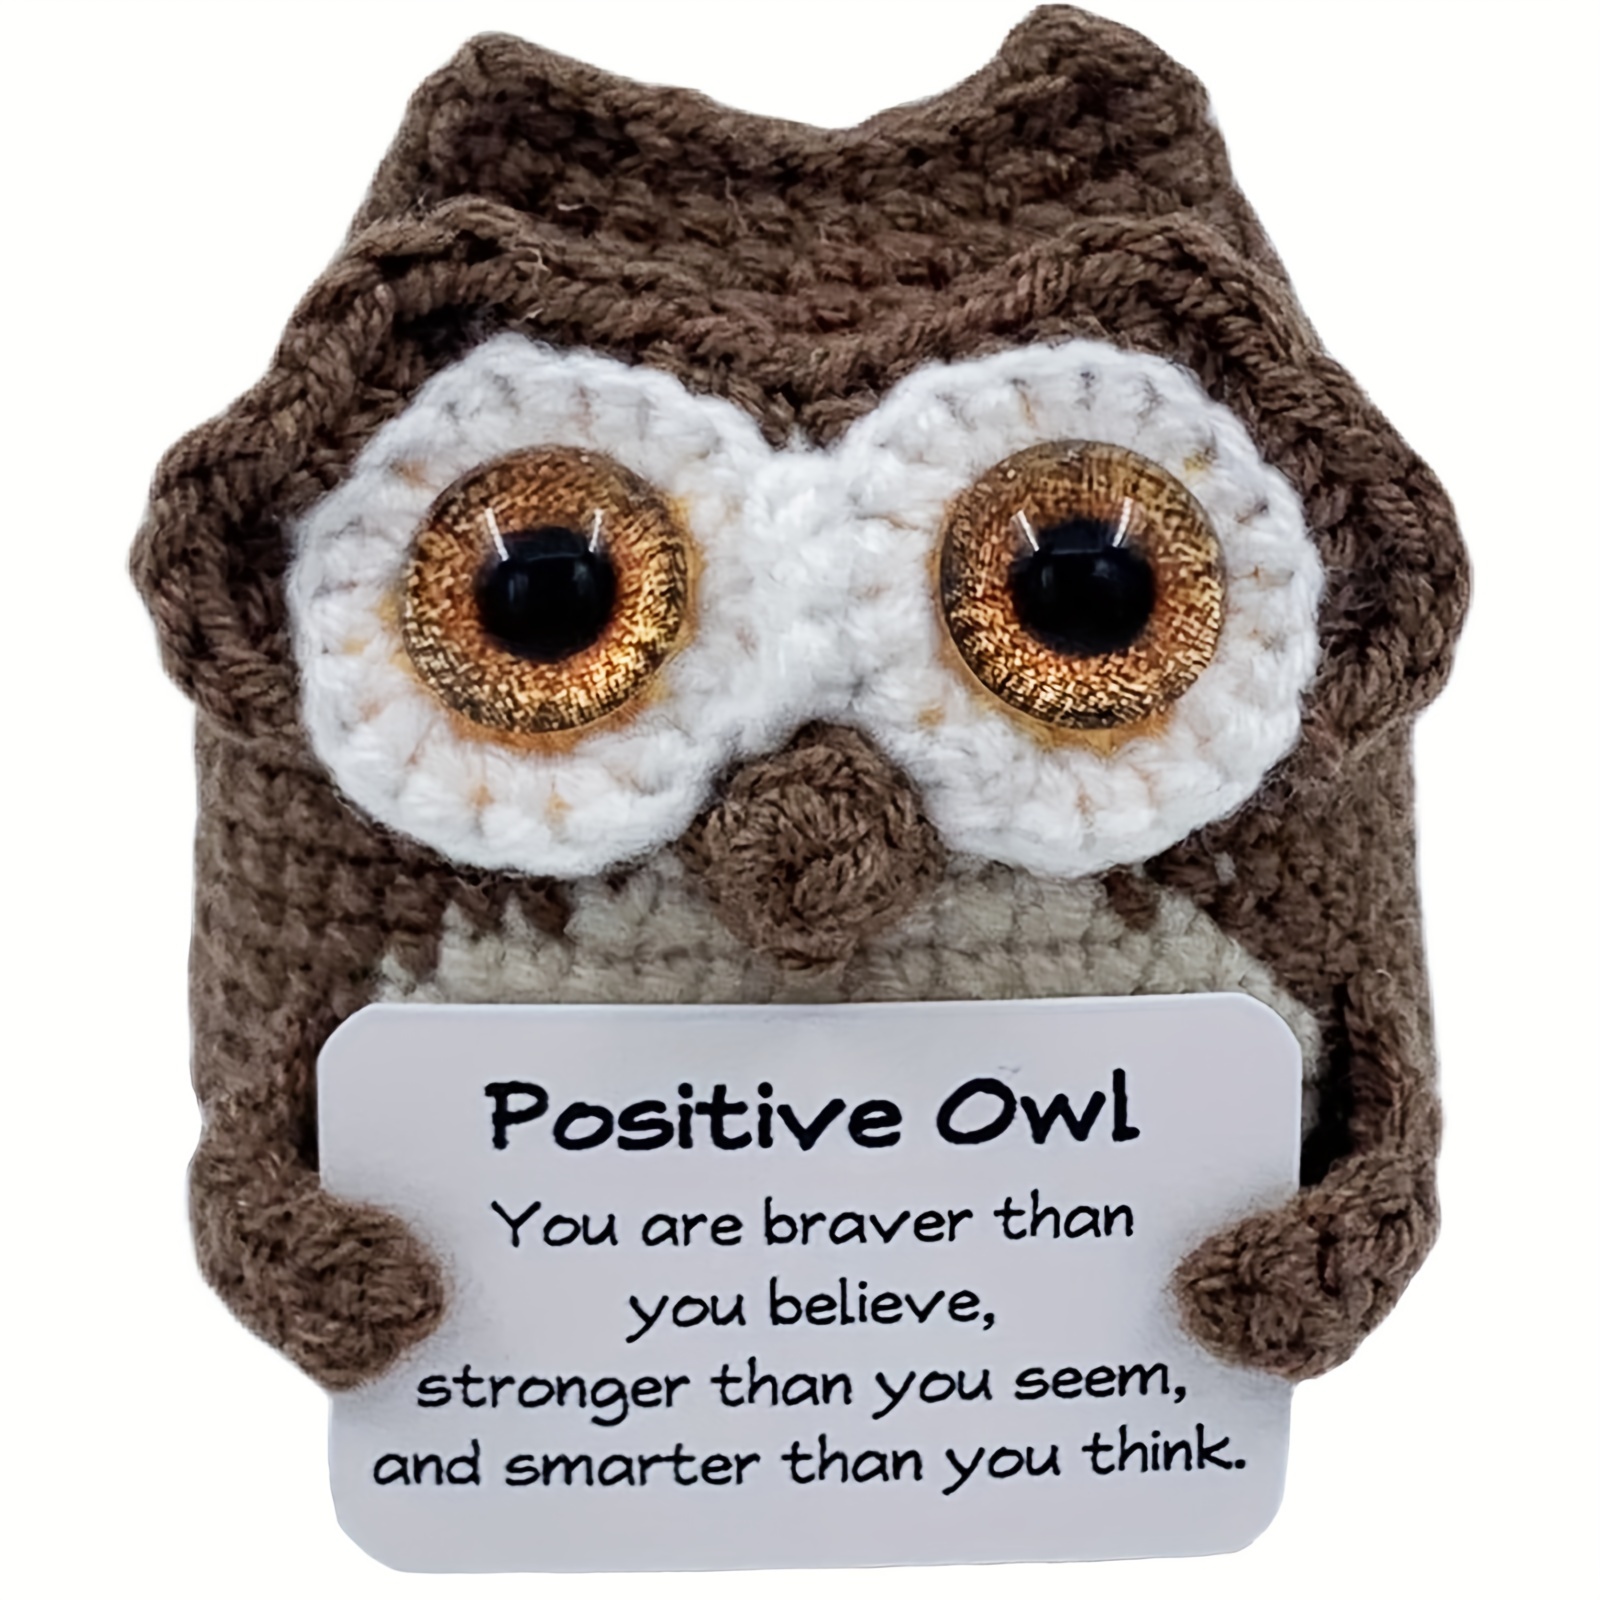 

Cute 3.14" Positive Owl Crochet Toy - Soft Wool Knit, Emotional Support With Encouragement Card, Perfect Birthday Gift For Teens & Adults